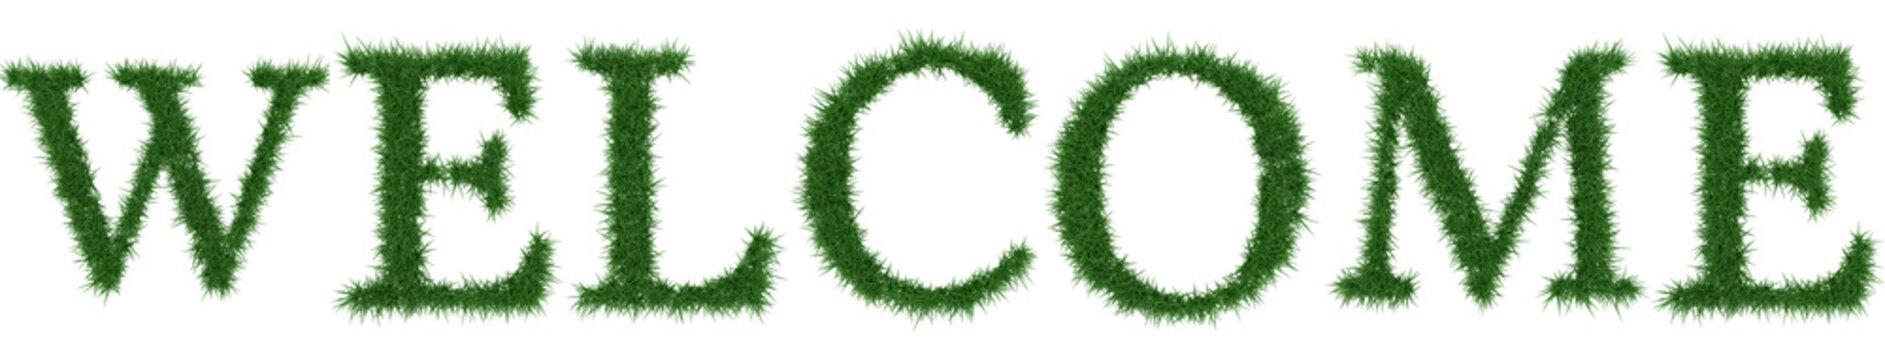 Welcome - 3D rendering fresh Grass letters isolated on whhite background.